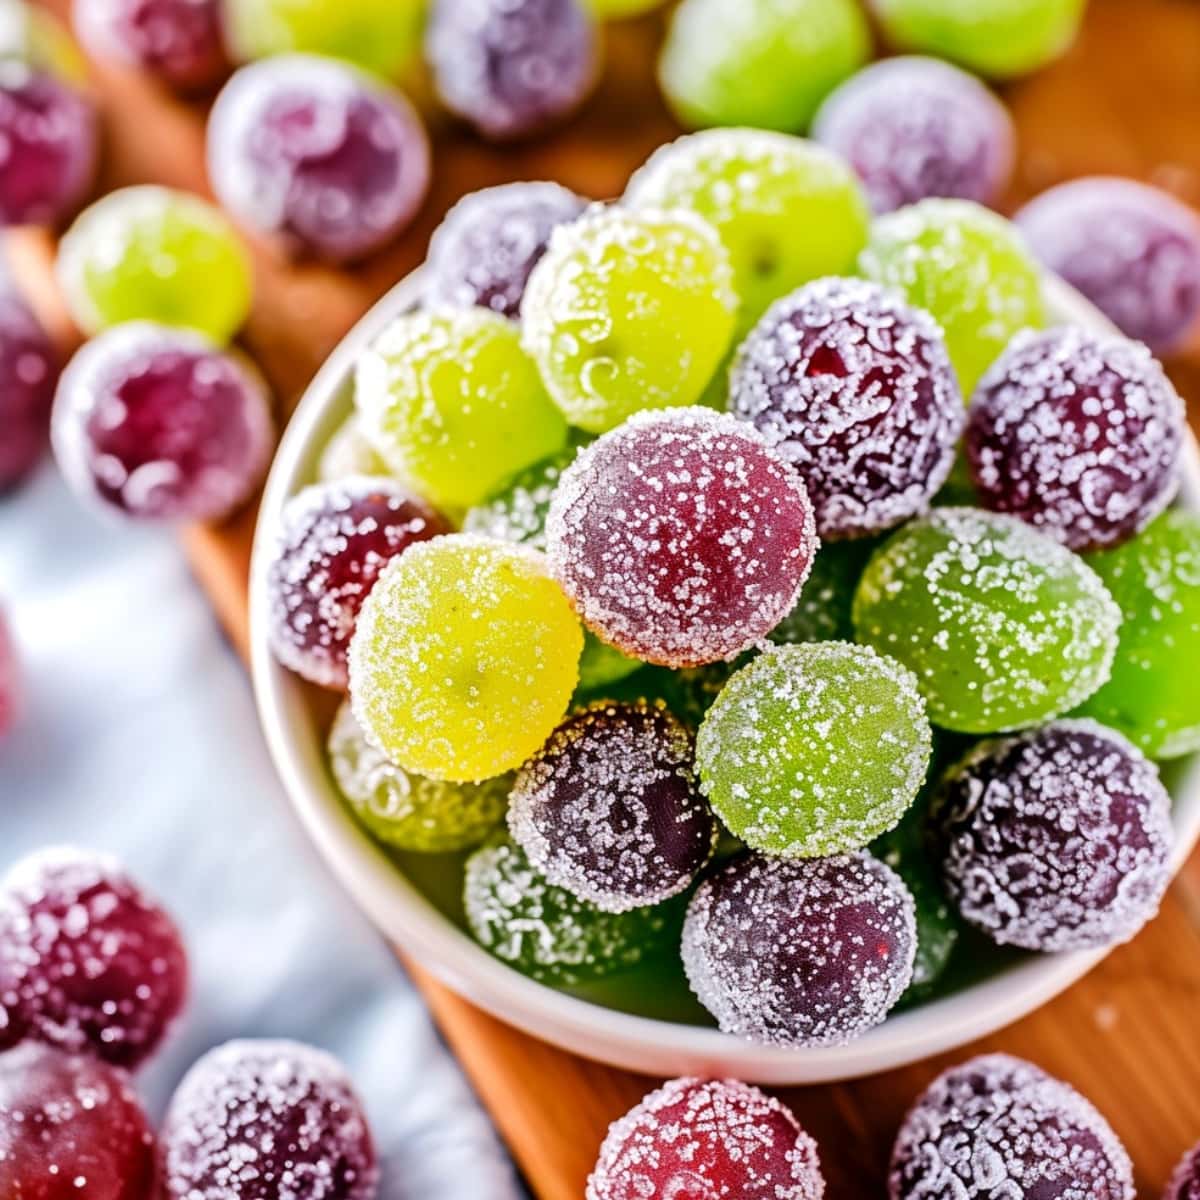 Sweet homemade colorful candied grapes in a bowl on a wooden board